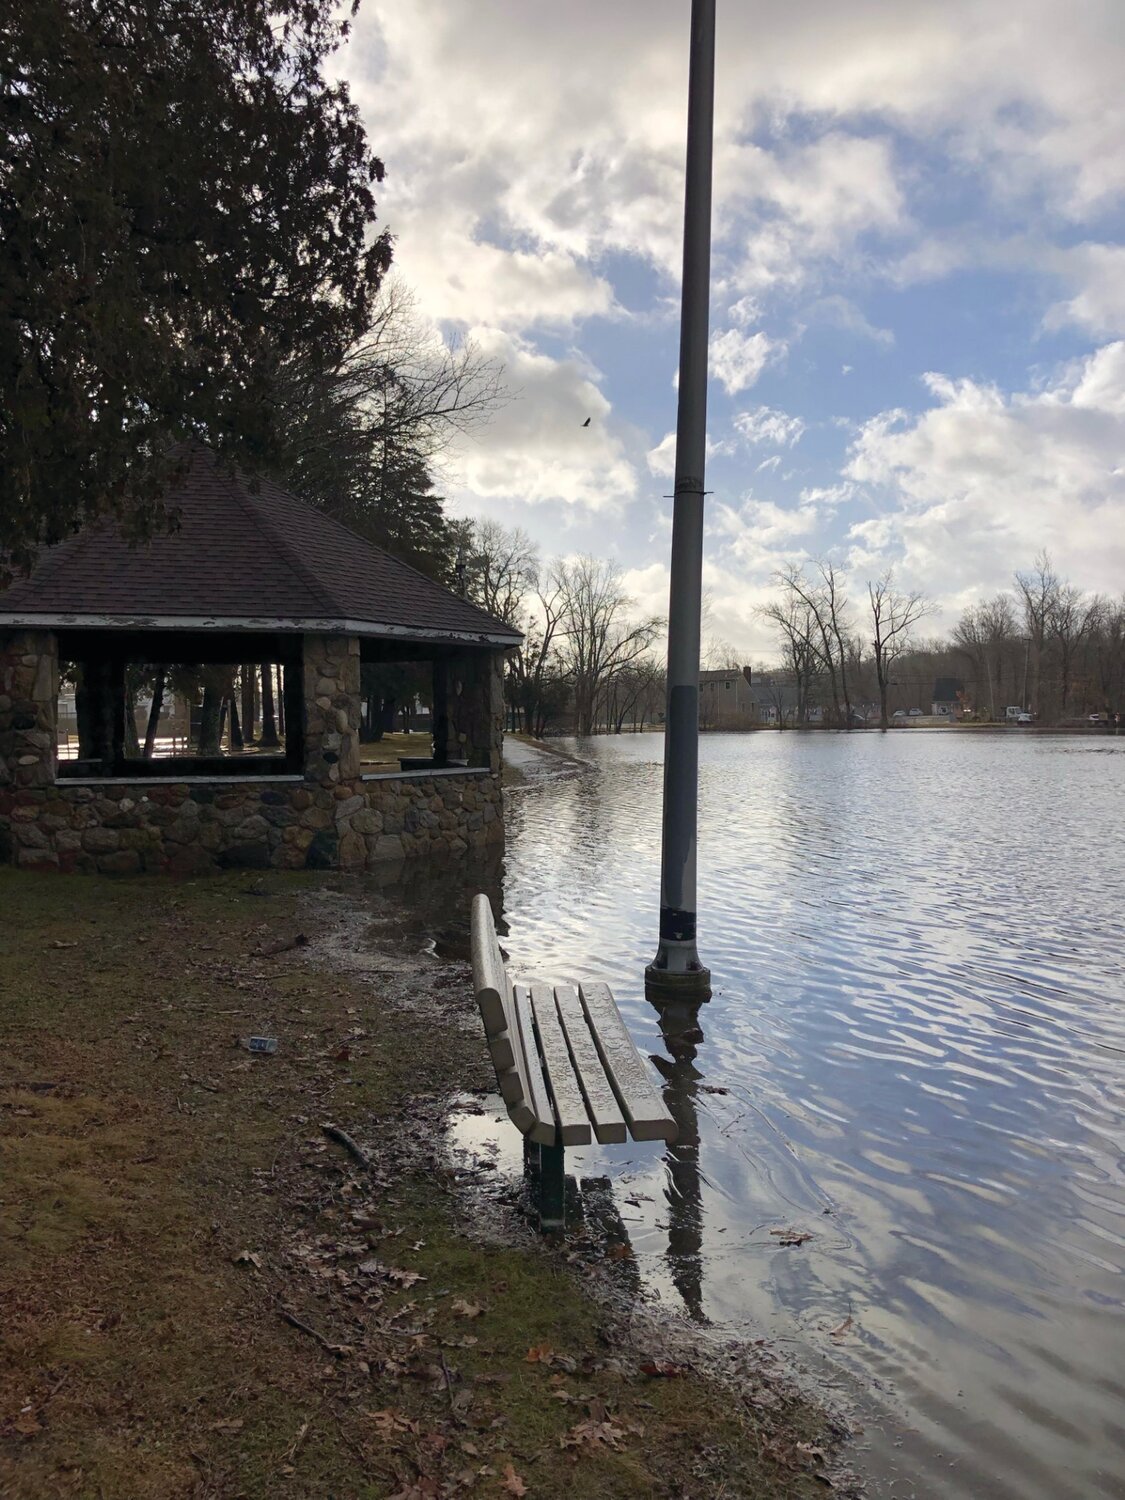 UNDER WATER: Johnston War Memorial Park was under water Wednesday morning. Memorial Boulevard was closed to traffic and impassable.